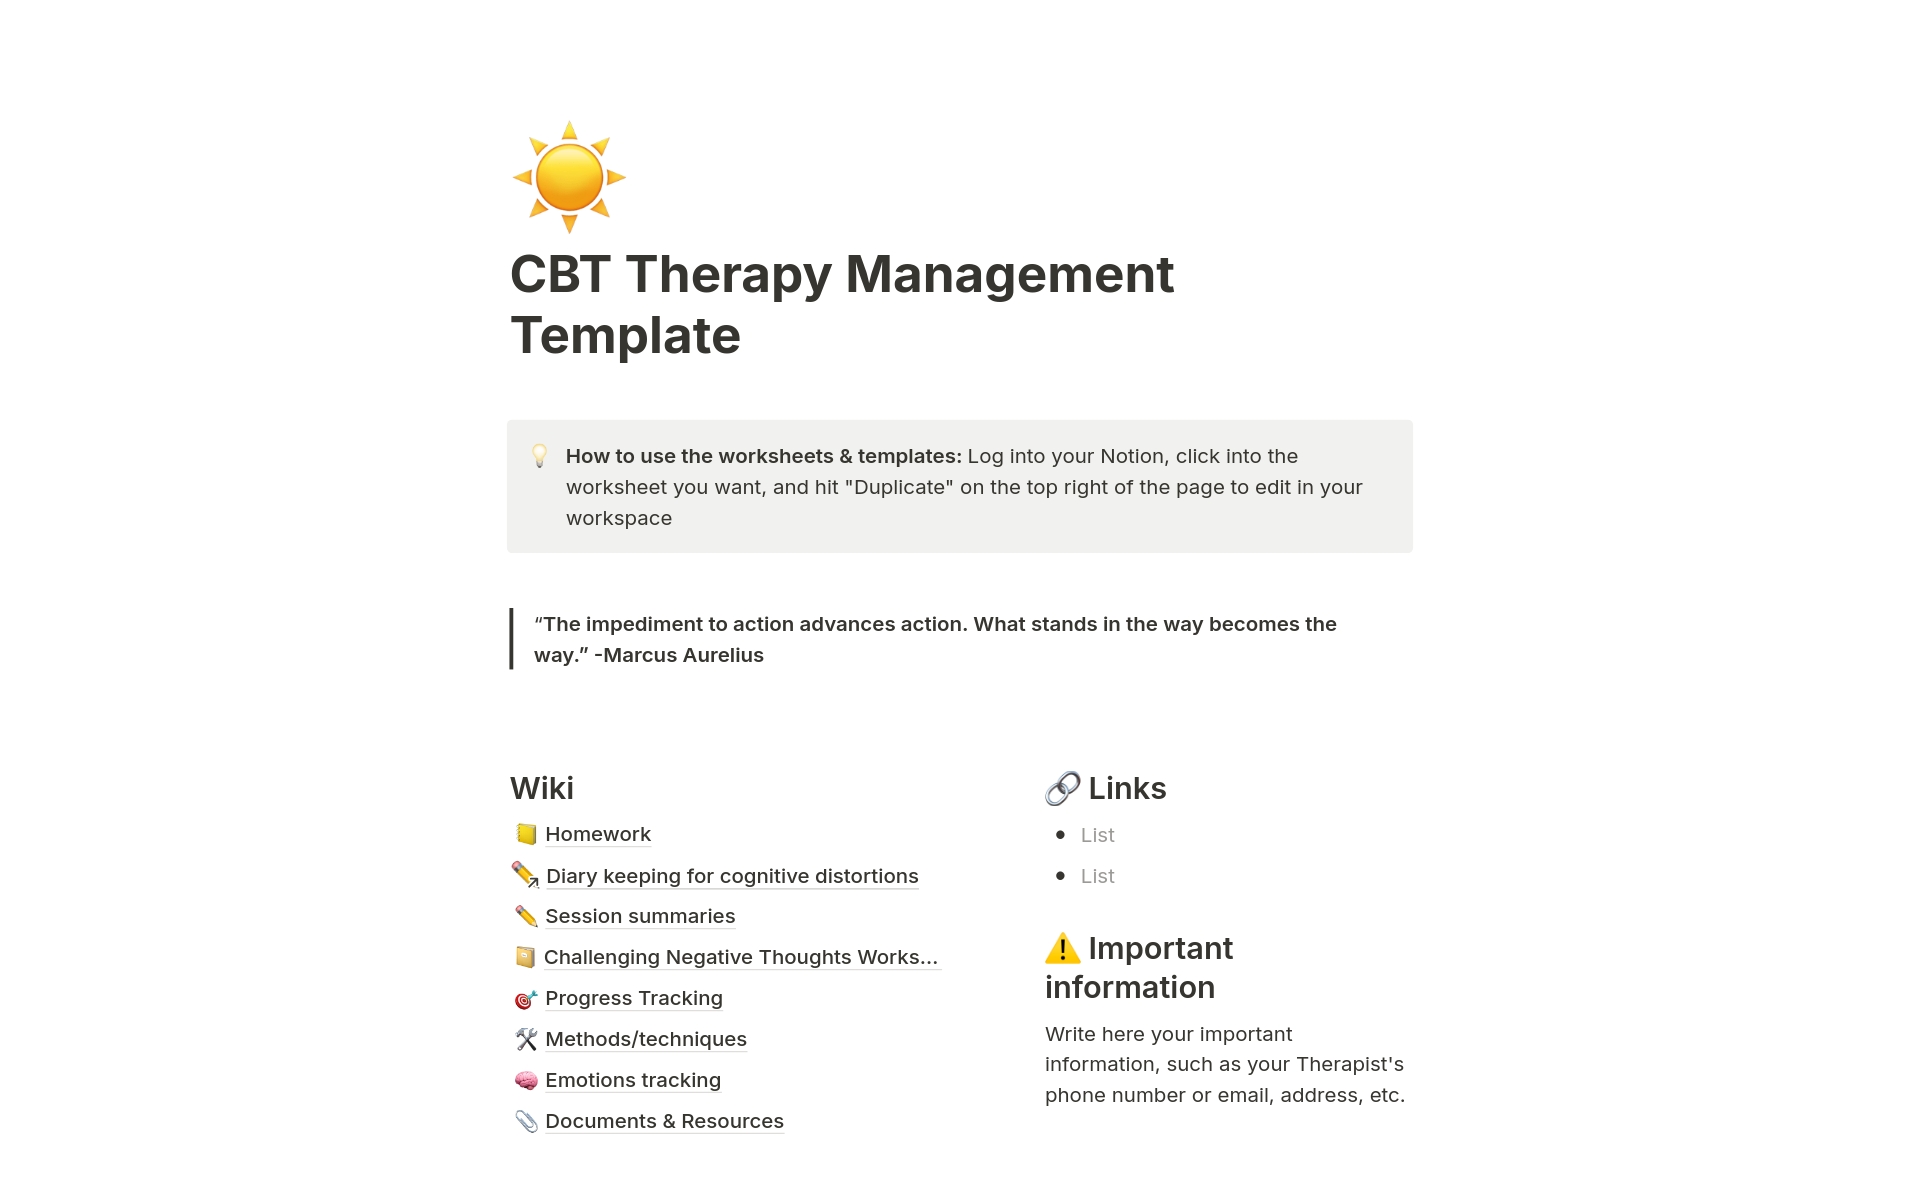 Introducing our CBT Therapy Management Template - an interactive management system for your therapy sessions. 
